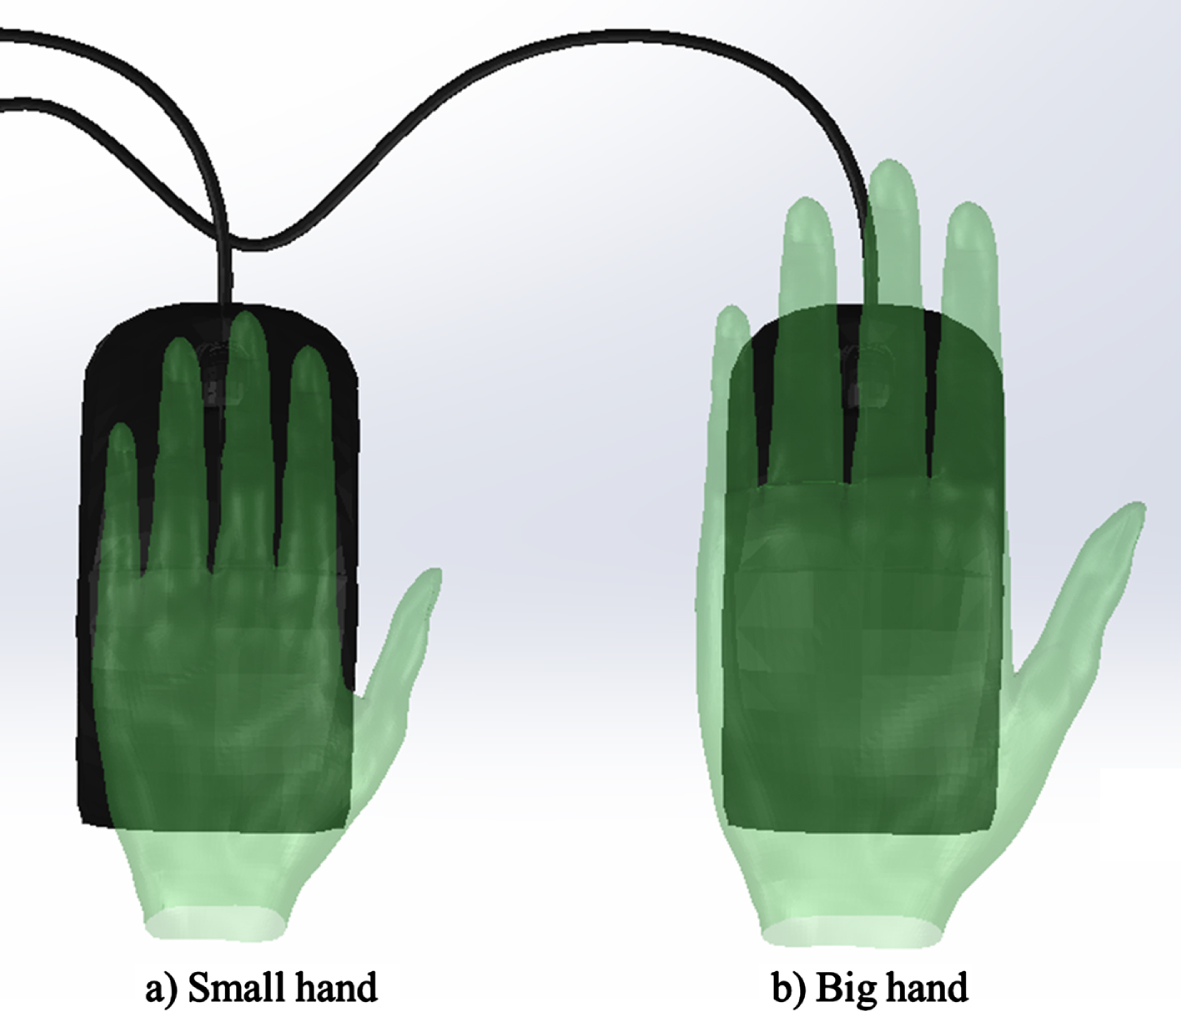 Accommodation problem when using a computer mouse. Using an incorrect hand tool size can cause awkward postures, e.g. (a) opening/stretching fingers or (b) shrinking fingers to use the scroll button and to displace the mouse.